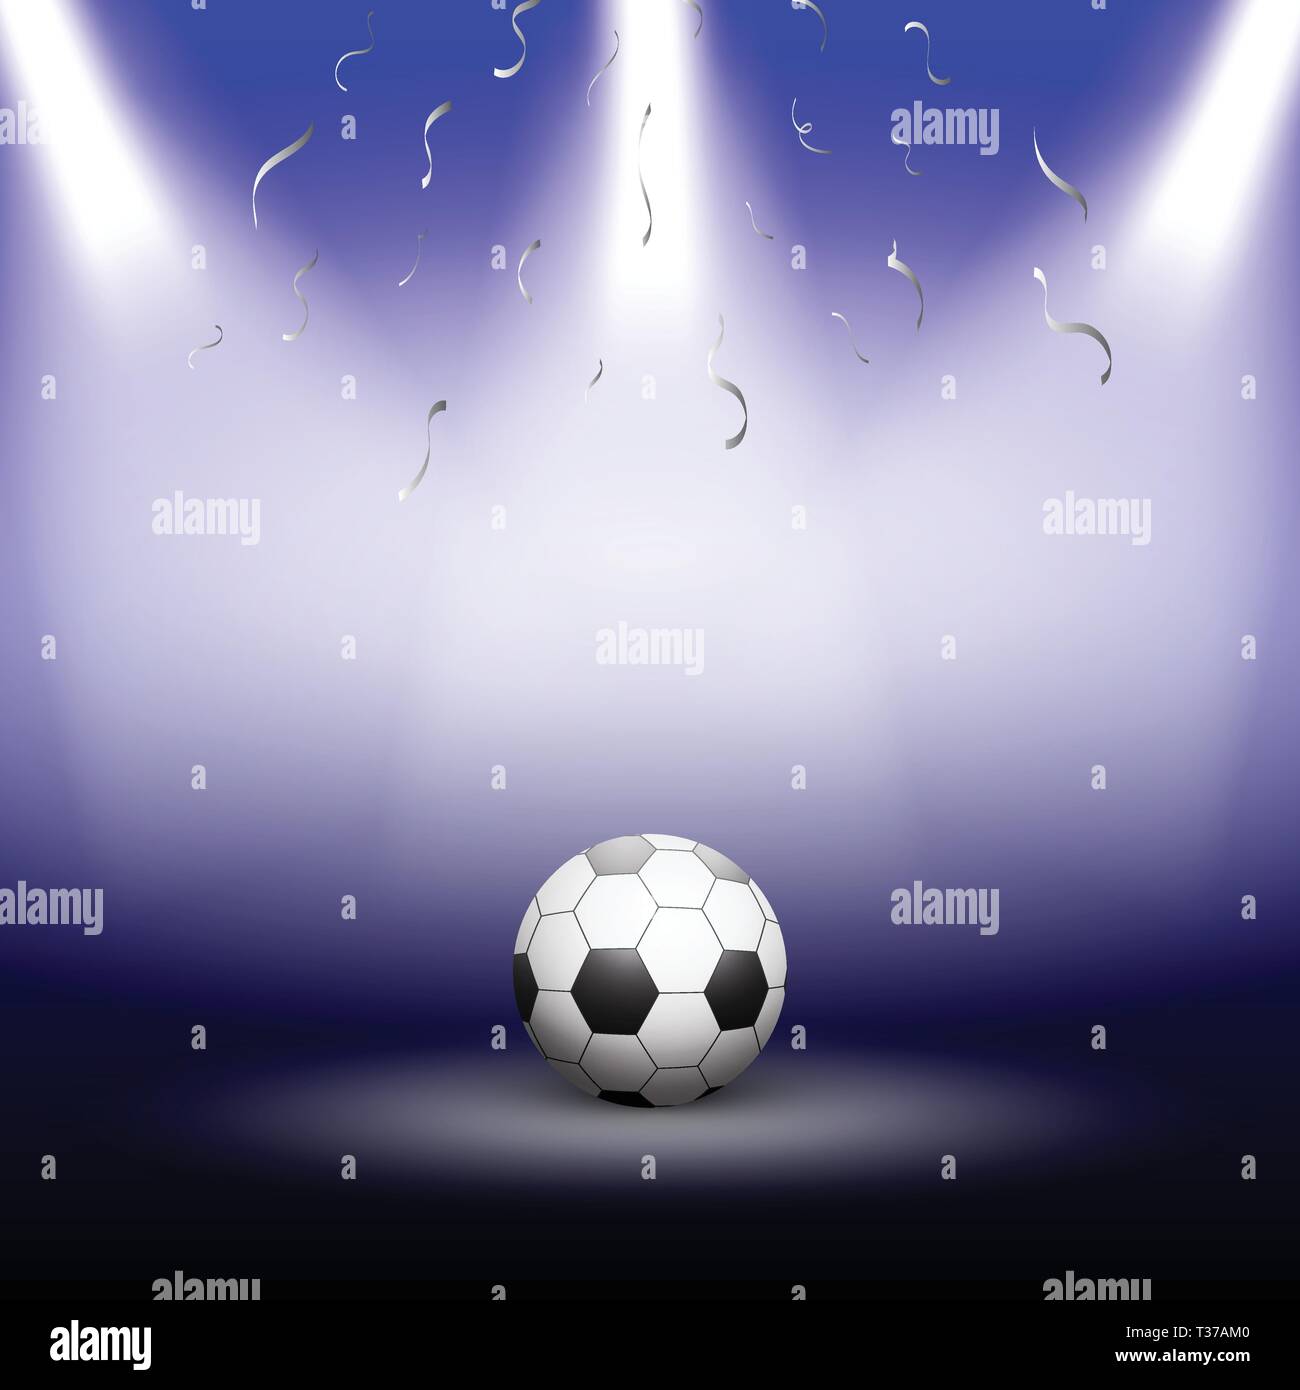 Festive sport design in blue color, with silver confetti. Illuminated football under the spot rays of light. Creative dark background. Stock Vector